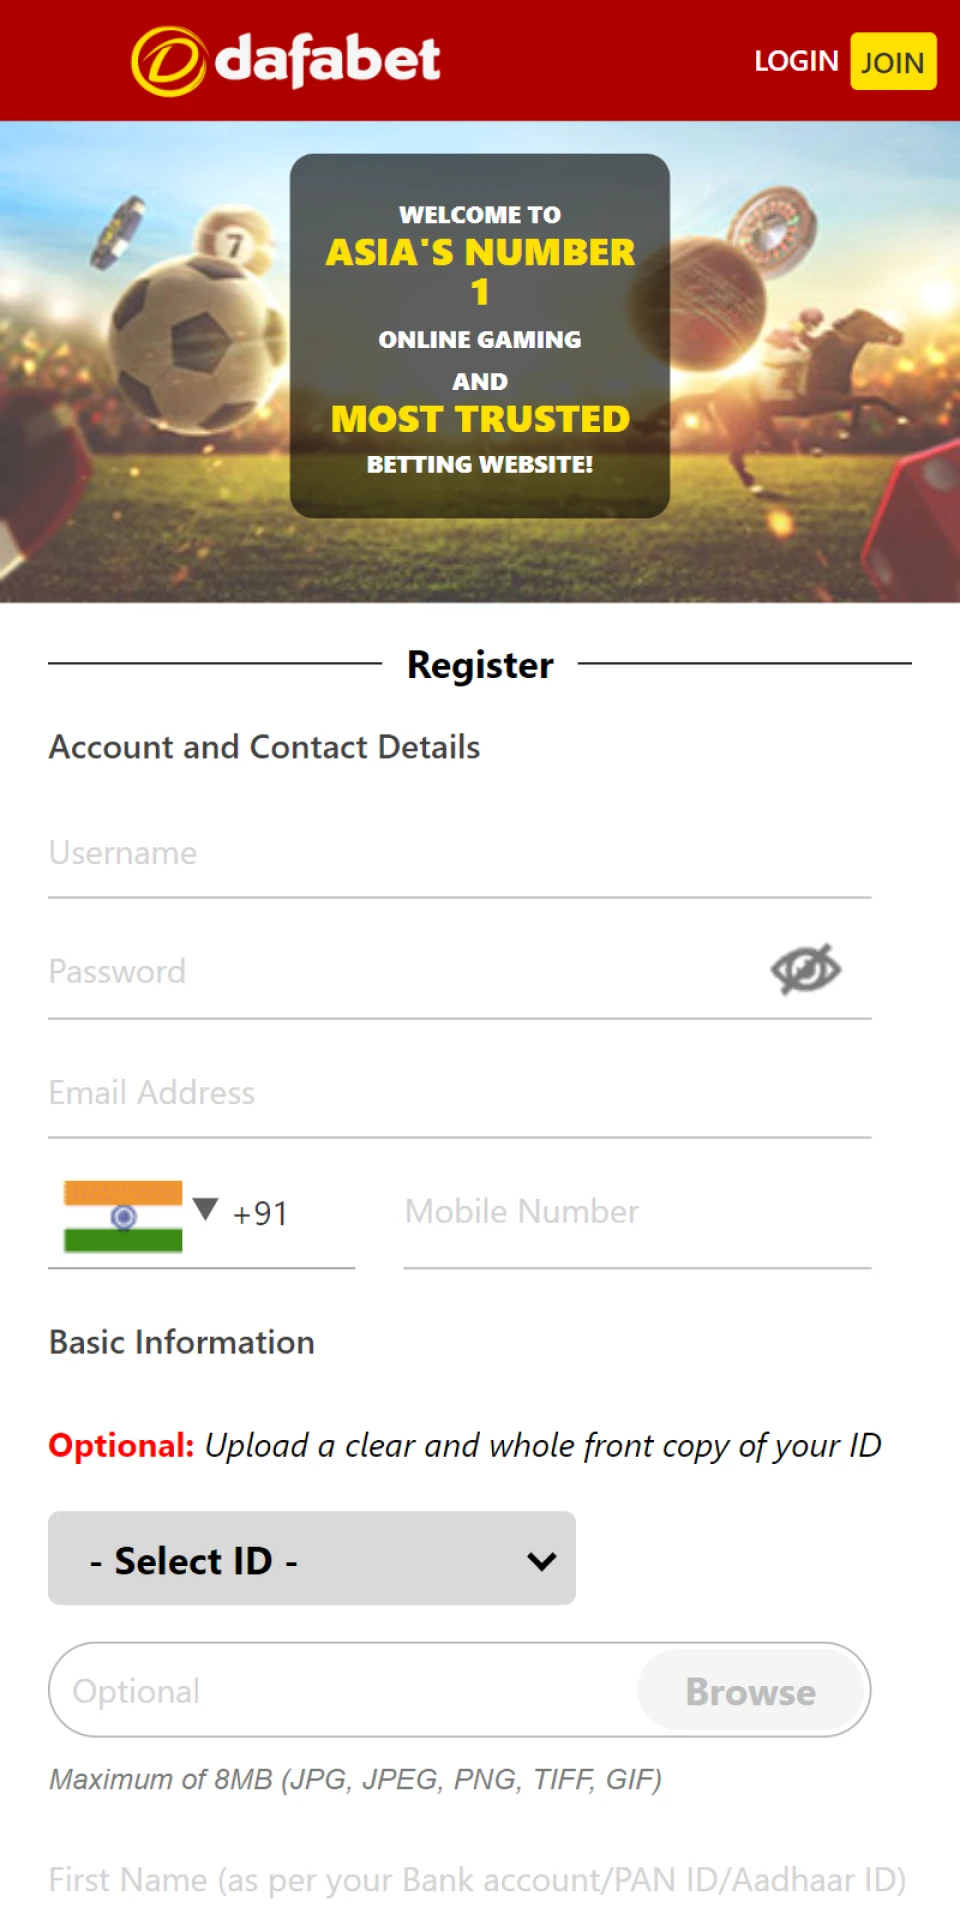 You can register directly from the Dafabet mobile app.